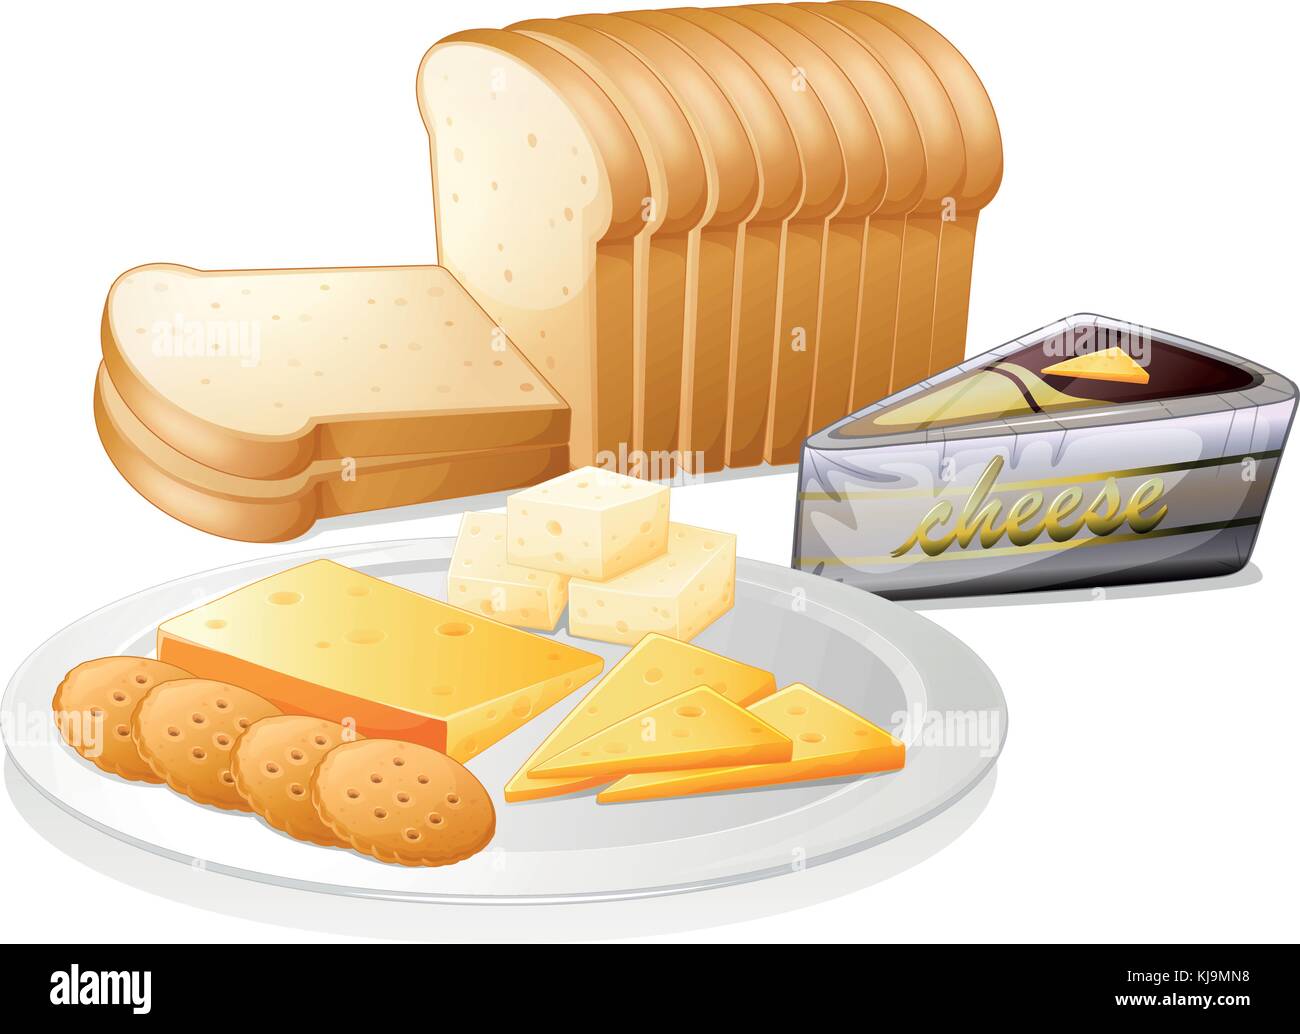 Illustration of the sliced bread with cheese and biscuits on a white background Stock Vector